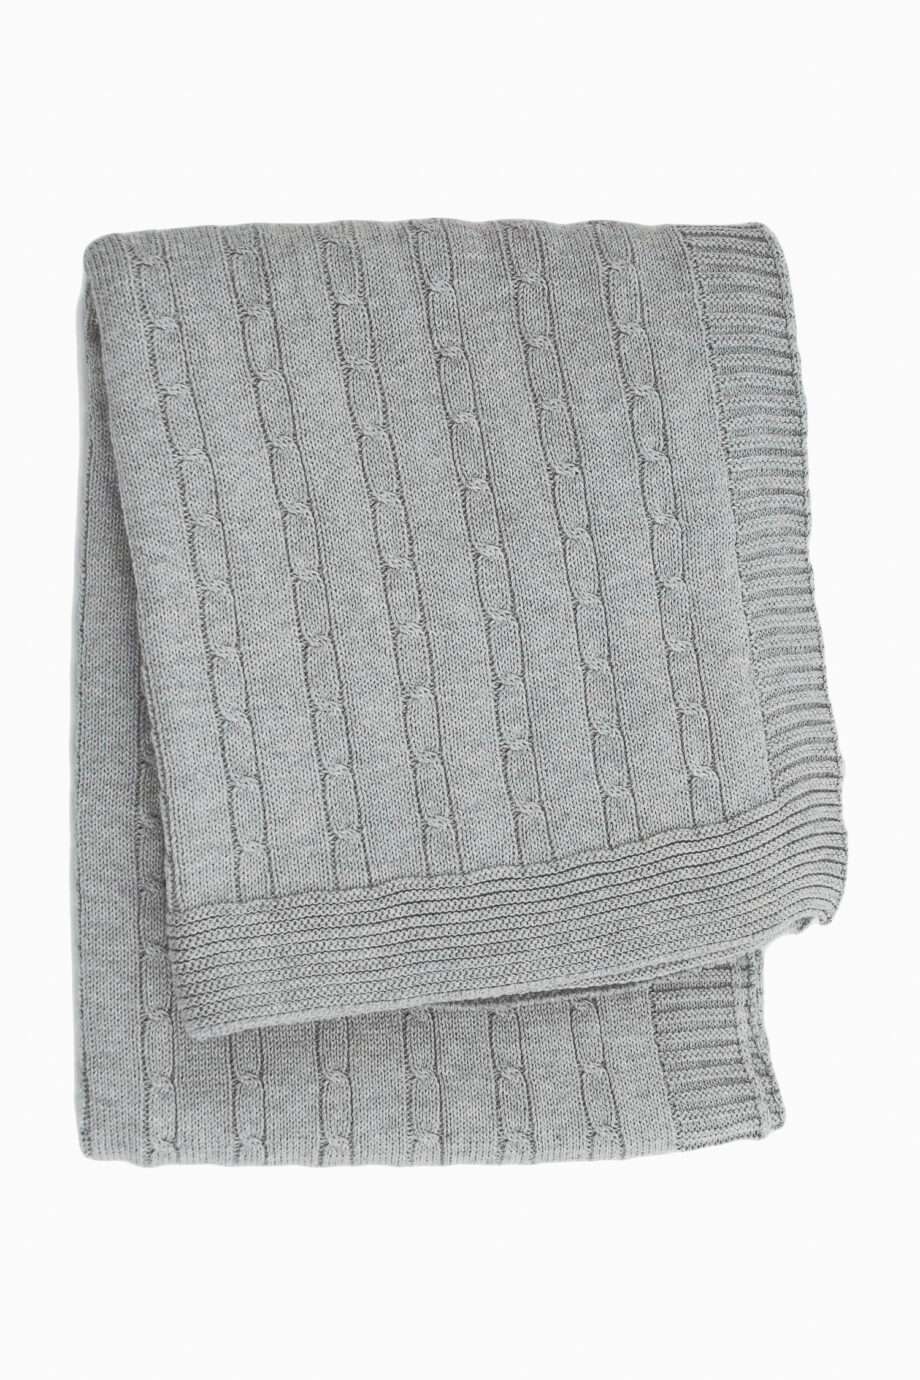 twist small light grey knitted cotton little blanket small